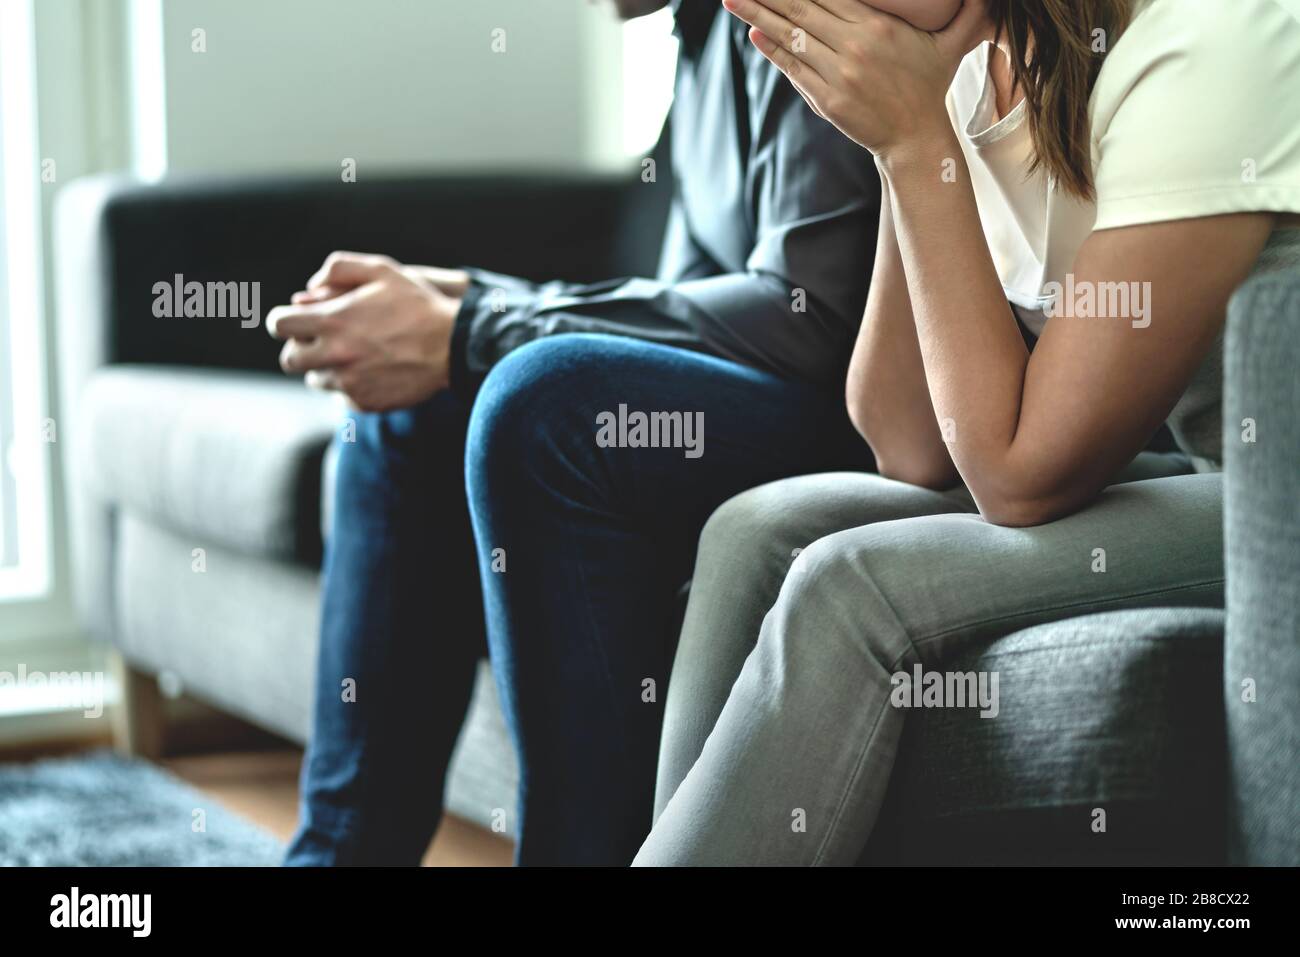 Jealousy, cheating or infidelity in relationship concept. Sad upset couple. No trust. Jealous wife or cheating husband. Married man and woman fighting. Stock Photo